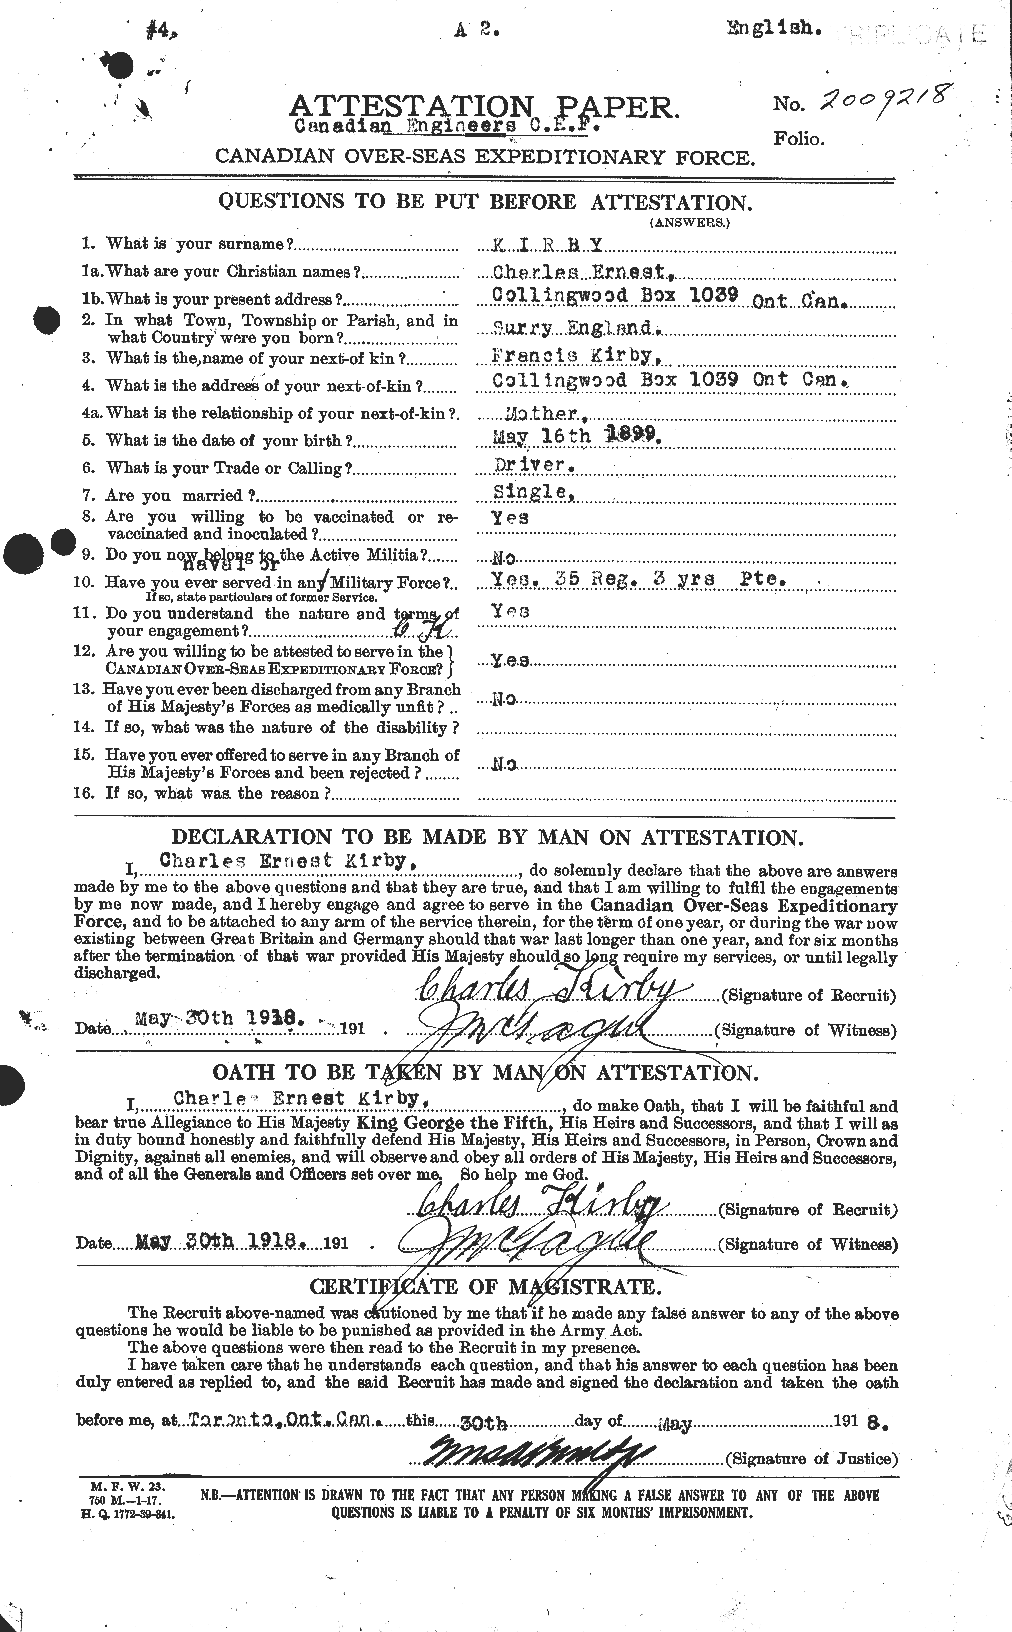 Personnel Records of the First World War - CEF 437165a